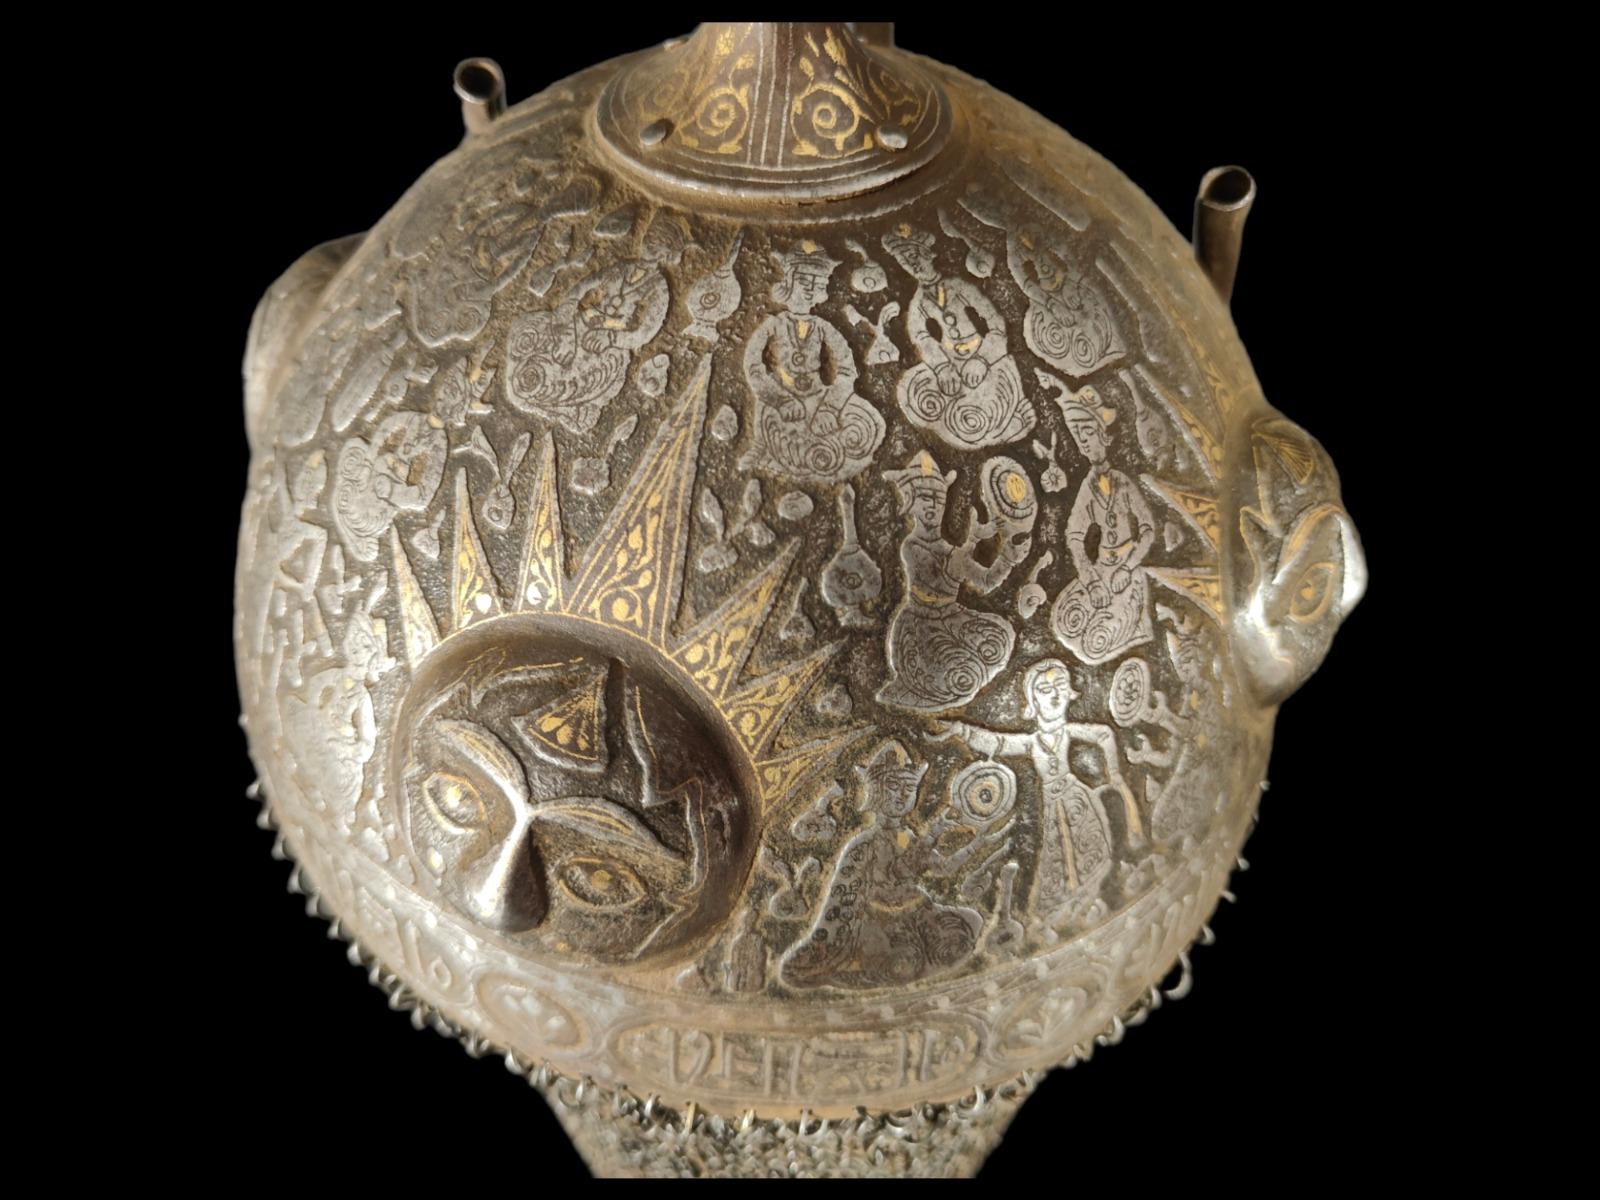 Helmet (Khula Khud) XIX century. Persia, Guajar. Made in damascus steel with silver and golden thread. Decorated with scenes of Persian palace life and several suns around in relief. Also has a damask calligraphy on the bottom. Noticed by its rarity